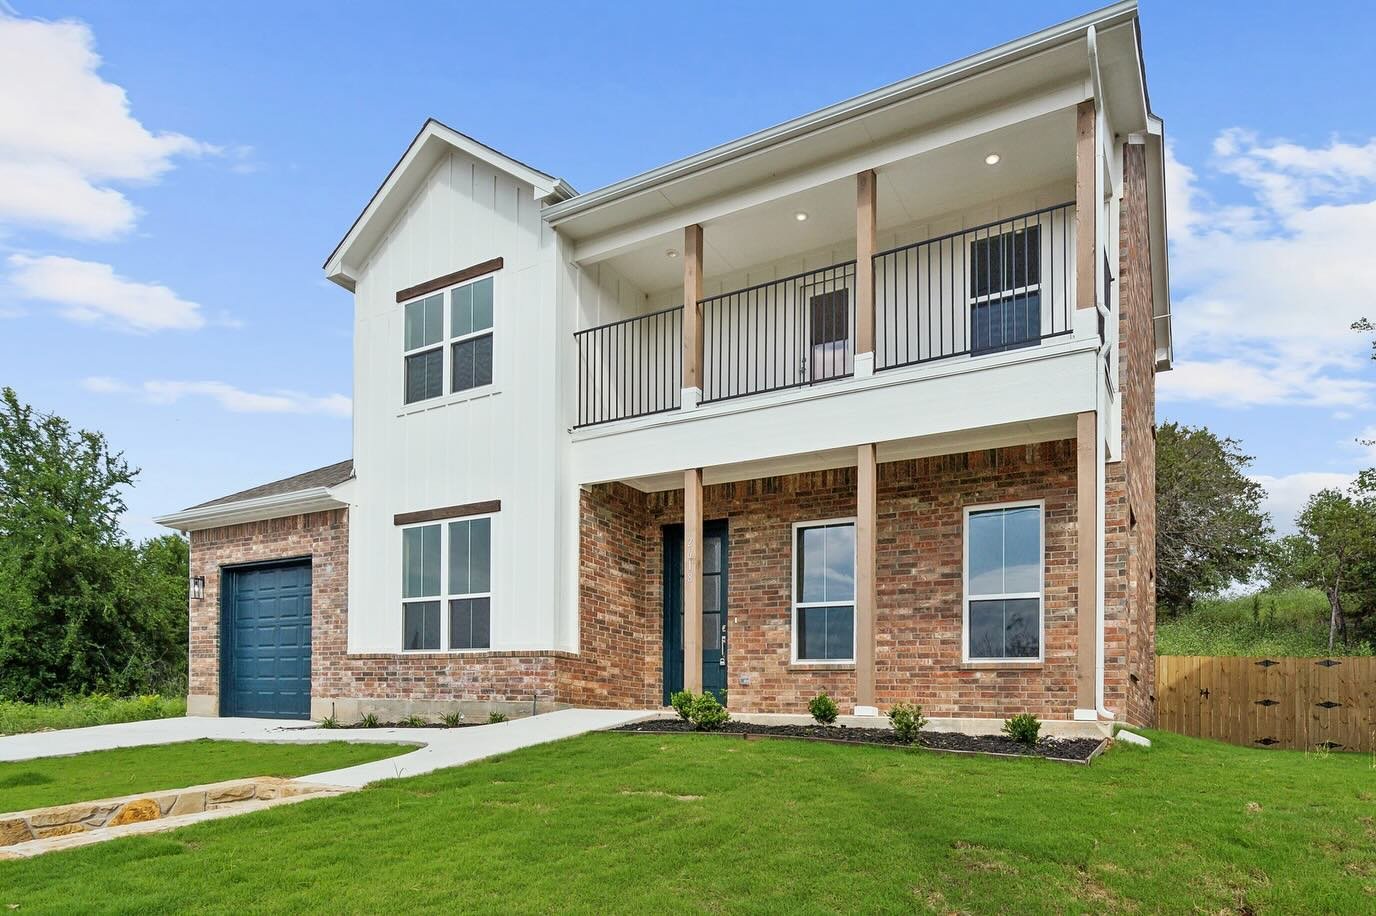 Looking for an amazing home in the $300,000 price range? We got you covered. ⁠
⁠
🏠️ 2618 Steepleridge Circle | Granbury, Texas 76048
🏠️ 10844 Braemoor Drive | Fort Worth, Texas 76052
🏠️ 1136 Roping Reins Way | Fort Worth, Texas 76052

Wanna see mo